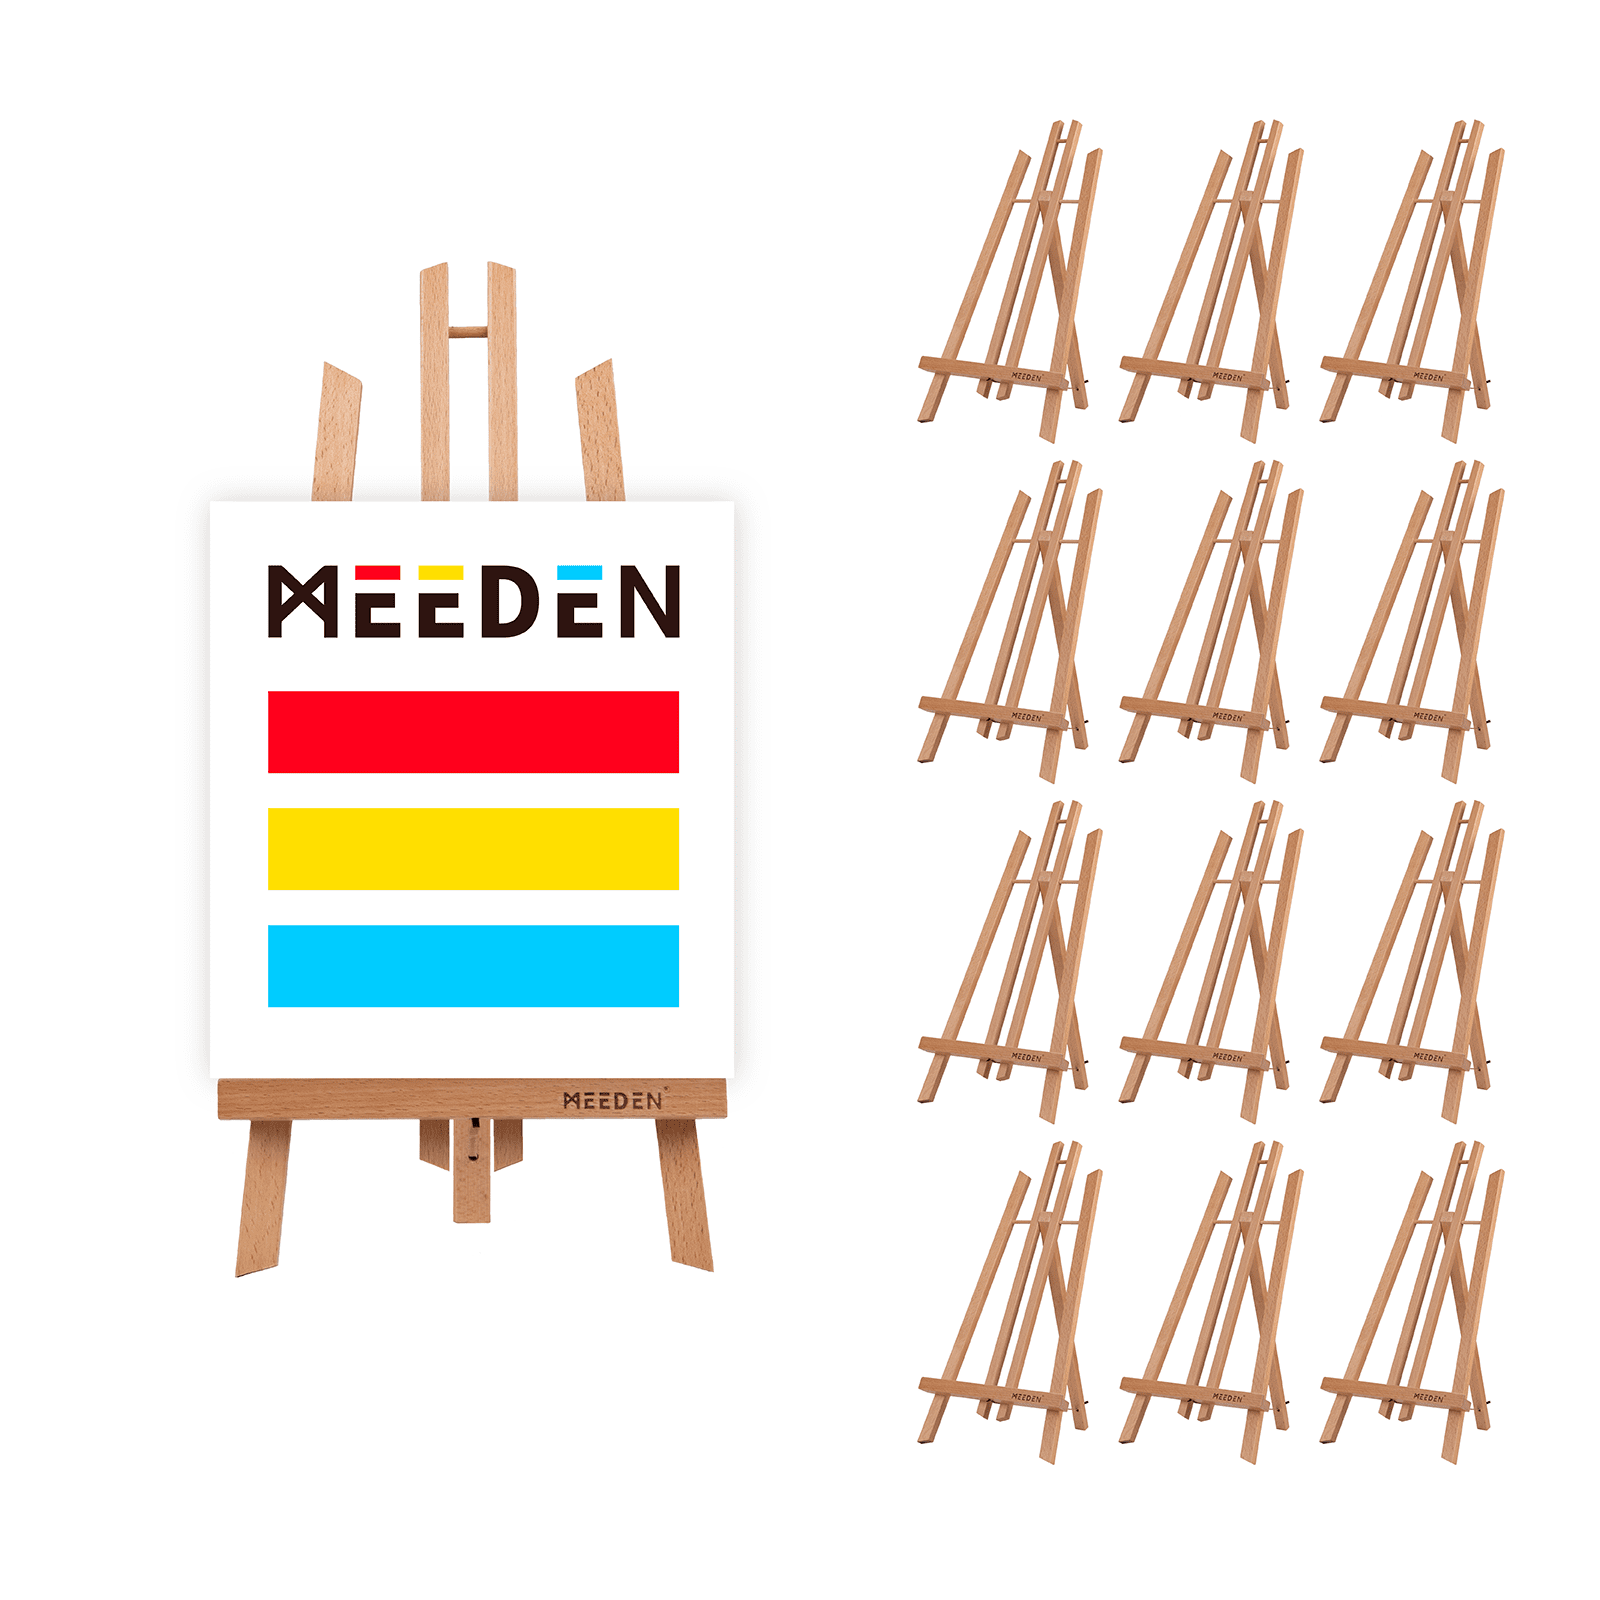 Sofullue 10PCS Small Desk Easels Canvas Painting Holder Wooden Tripod Easels  Tabletop Display Stand for Photo Chalkboard Signs 